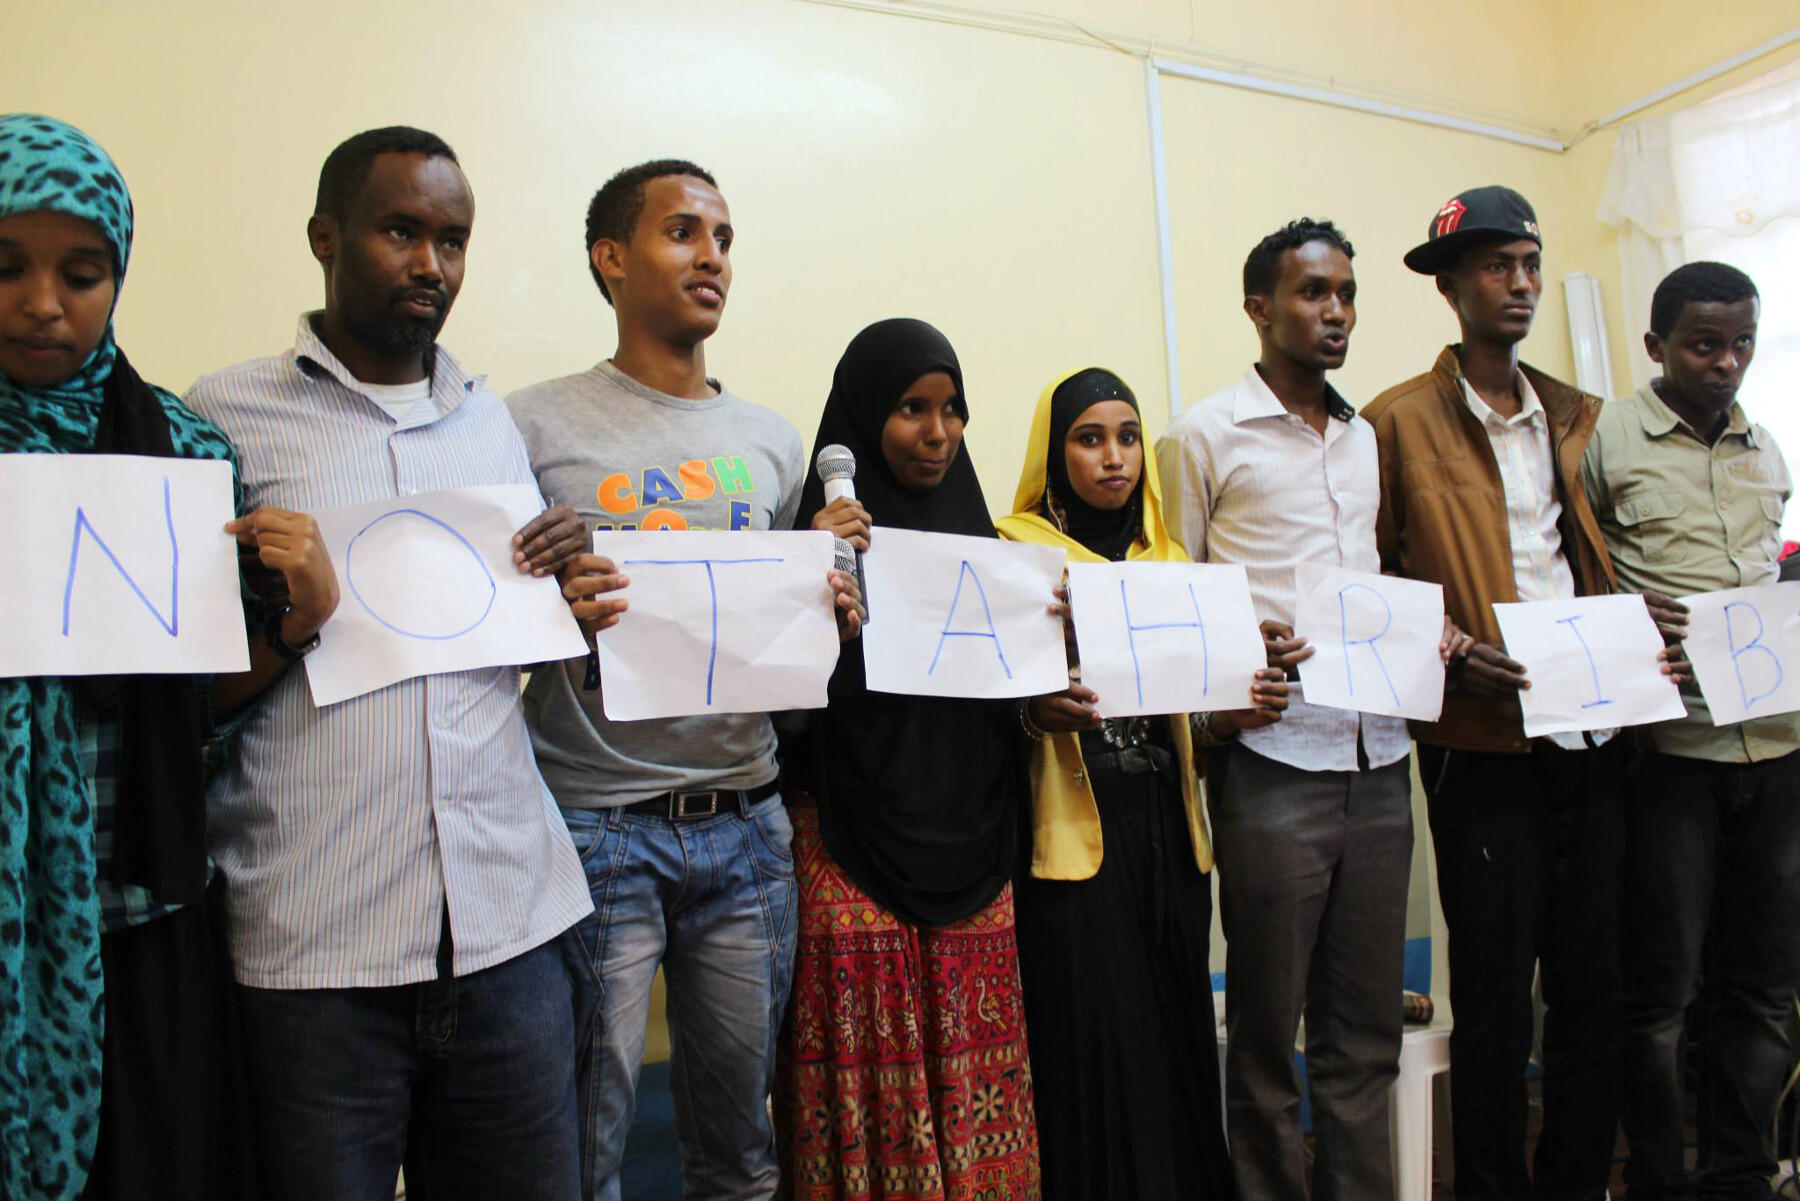 At the mental health clinic in Nairobi, youth leaders and staffers perform a play that dealt with human trafficking (or “tahrib” in Somali). They are holding a sign that says “No Tahrib.
<br>Photo by Hyojin Im.